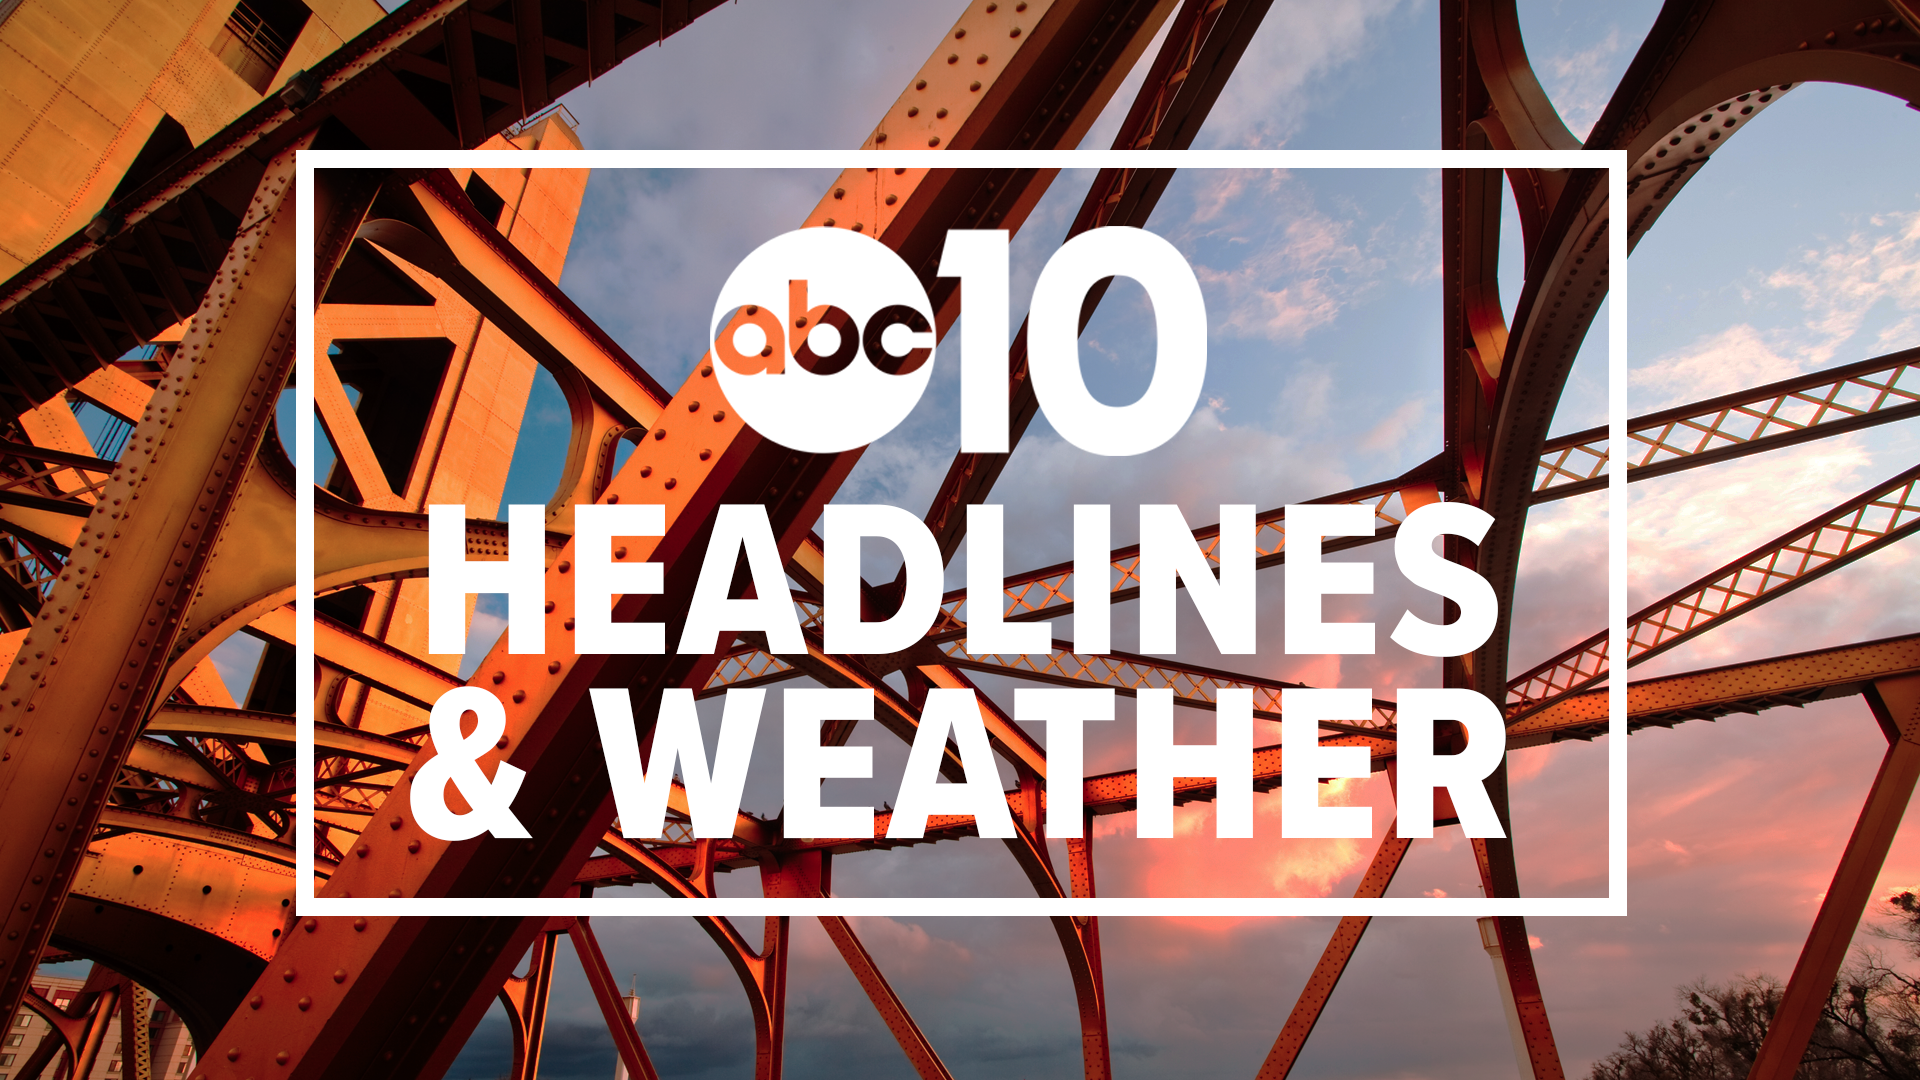 Evening Headlines: March. 3, 2020 | Catch in-depth reporting on #LateNewsTonight at 11 p.m. | The latest Sacramento news is always at www.abc10.com.